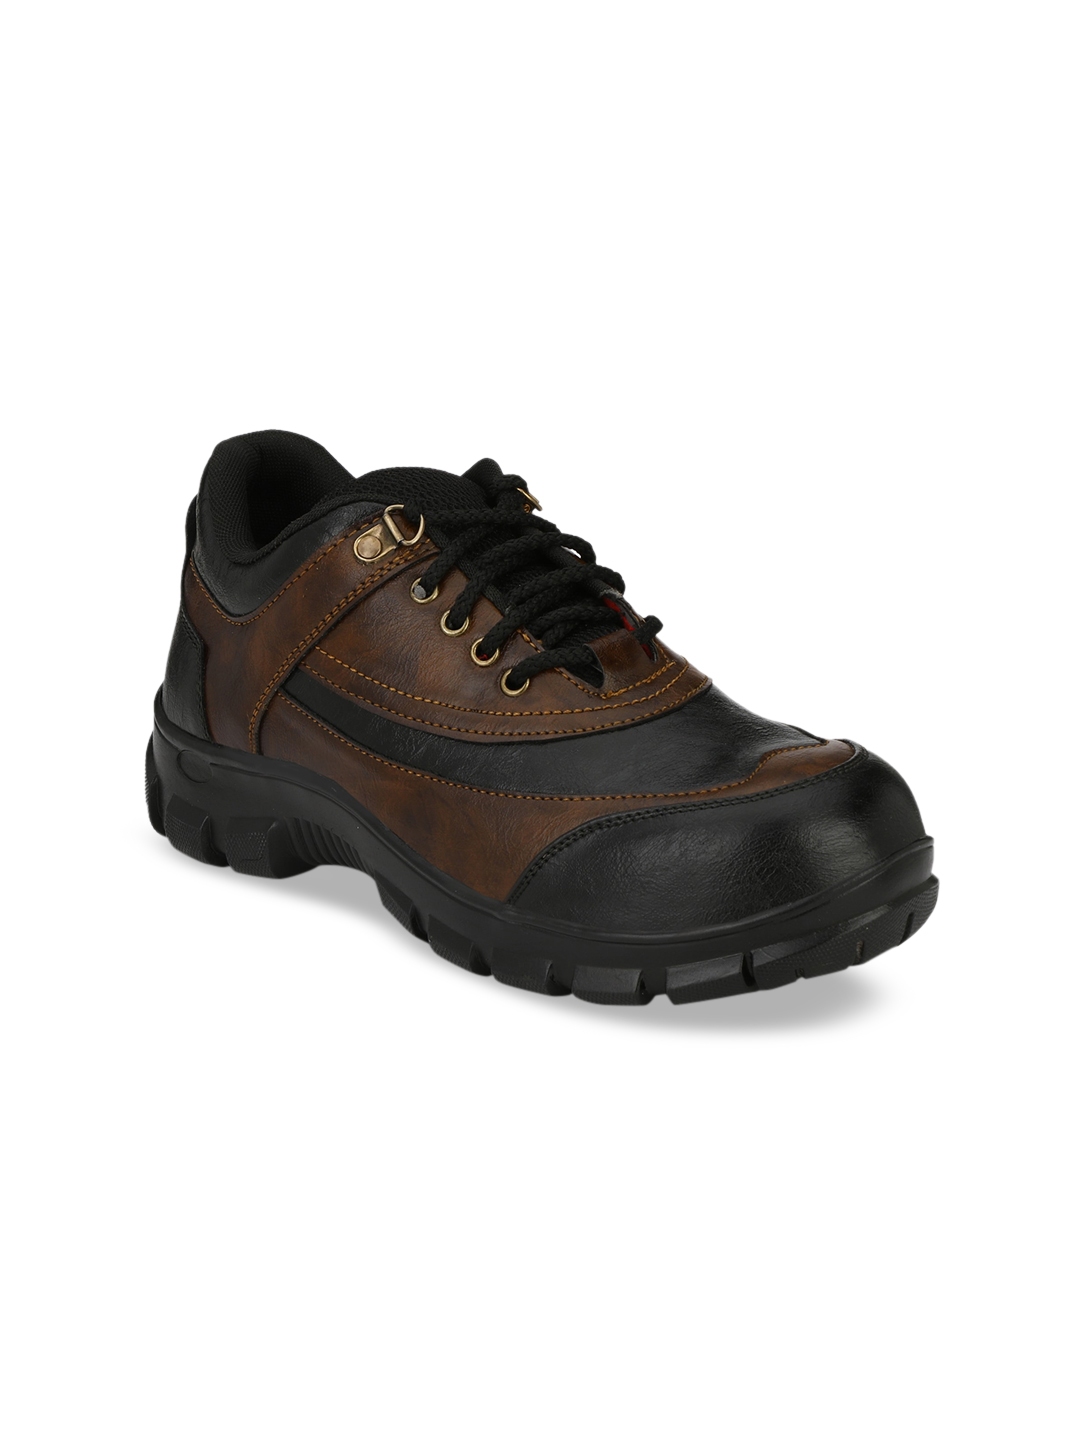 Buy TimberWood Unisex Brown Trekking Shoes - Casual Shoes for Unisex